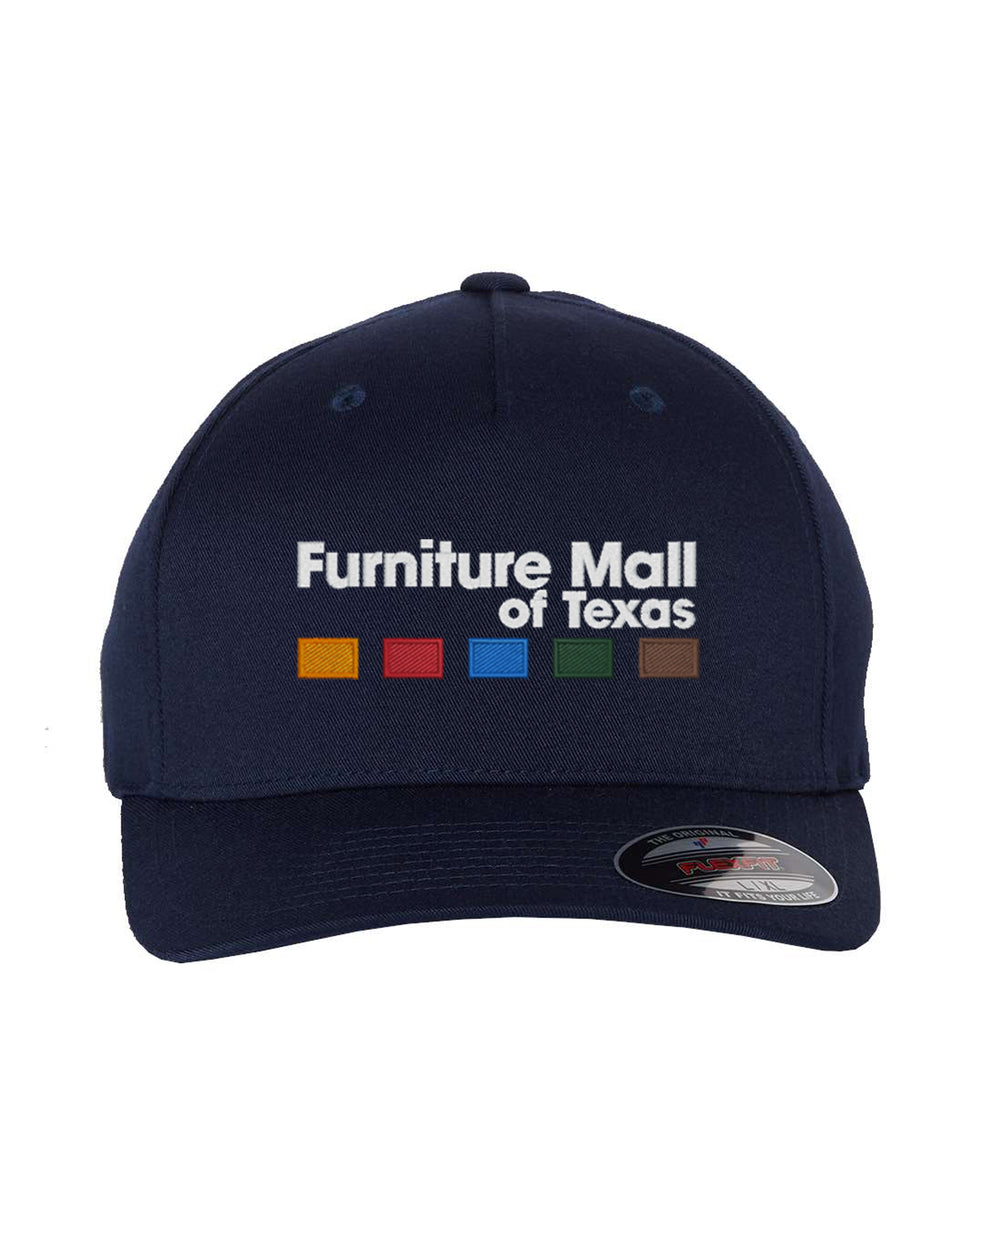 Furniture Mall of Texas - Flexfit Adult 5-Panel Poly-Twill Cap - 6560